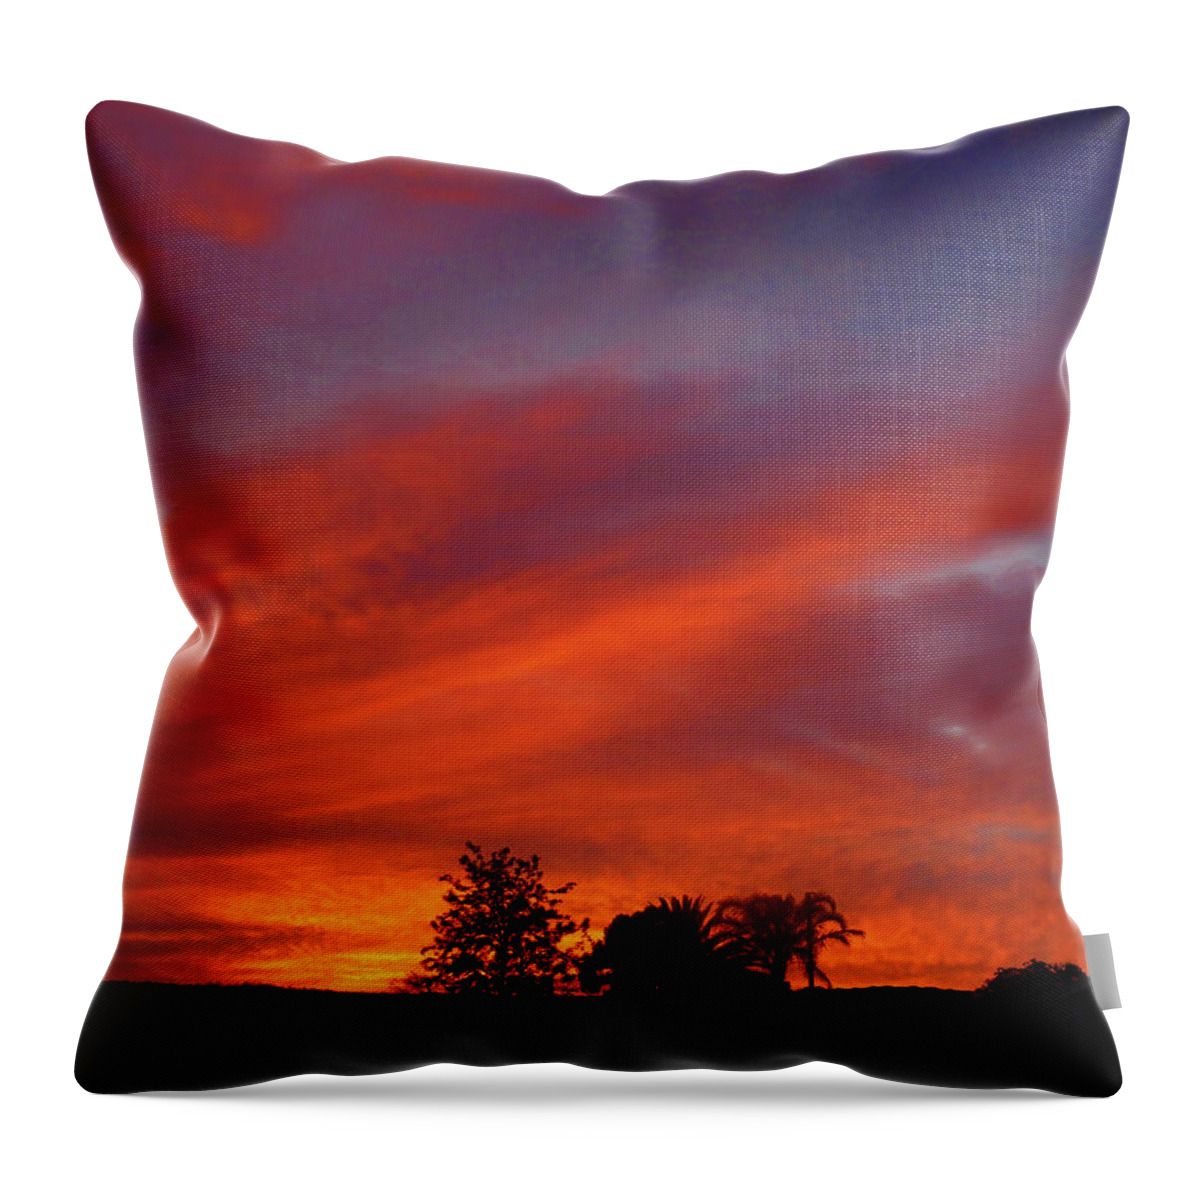 Sunrise Throw Pillow featuring the photograph Metallic Sunrise by Mark Blauhoefer